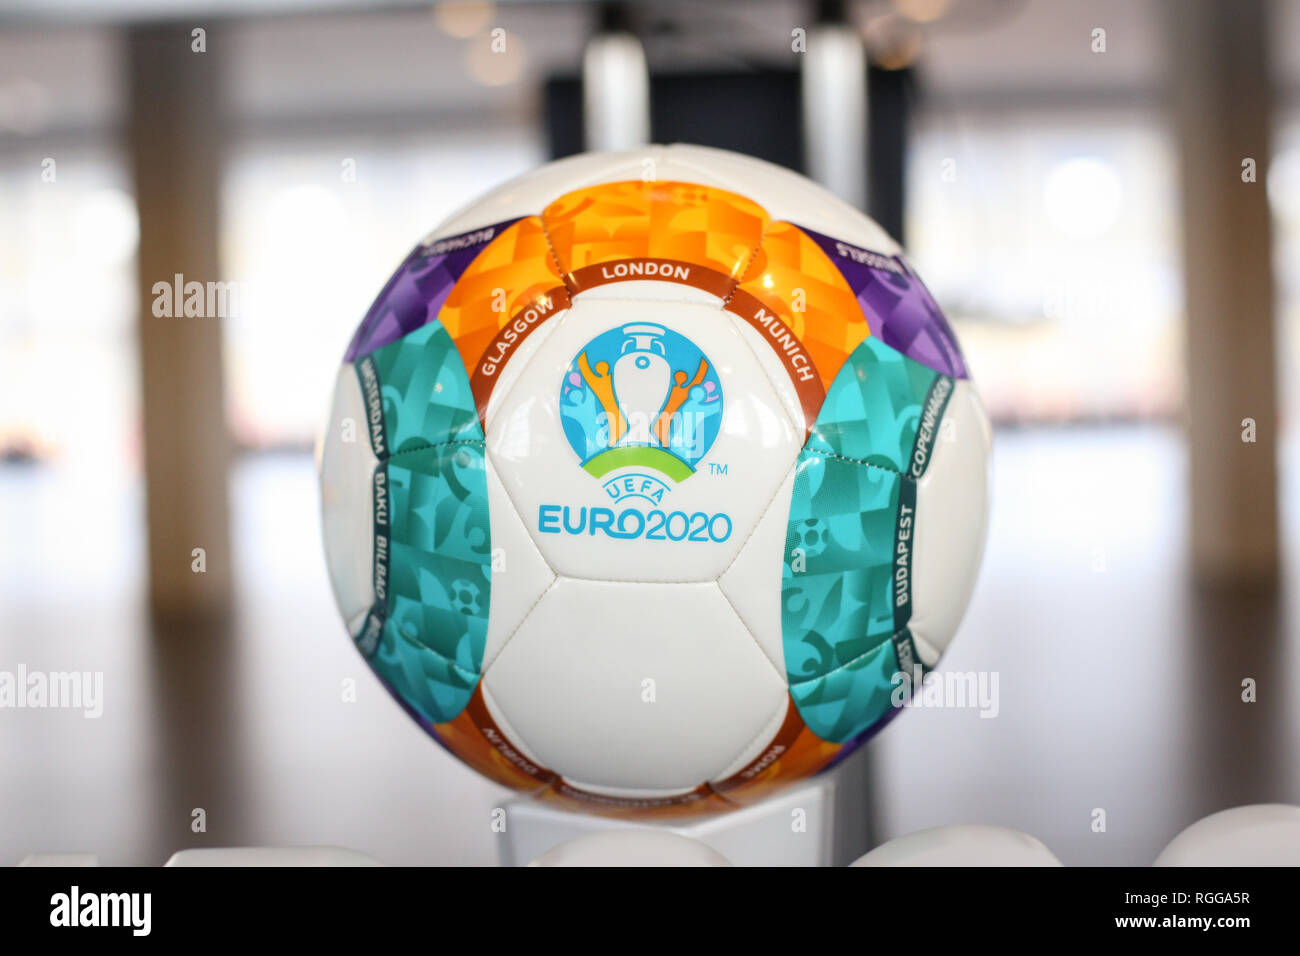 Bucharest, Romania - January 29, 2019: The 2020 UEFA European Football Championship (commonly referred to as UEFA Euro 2020) logo and official ball du Stock Photo